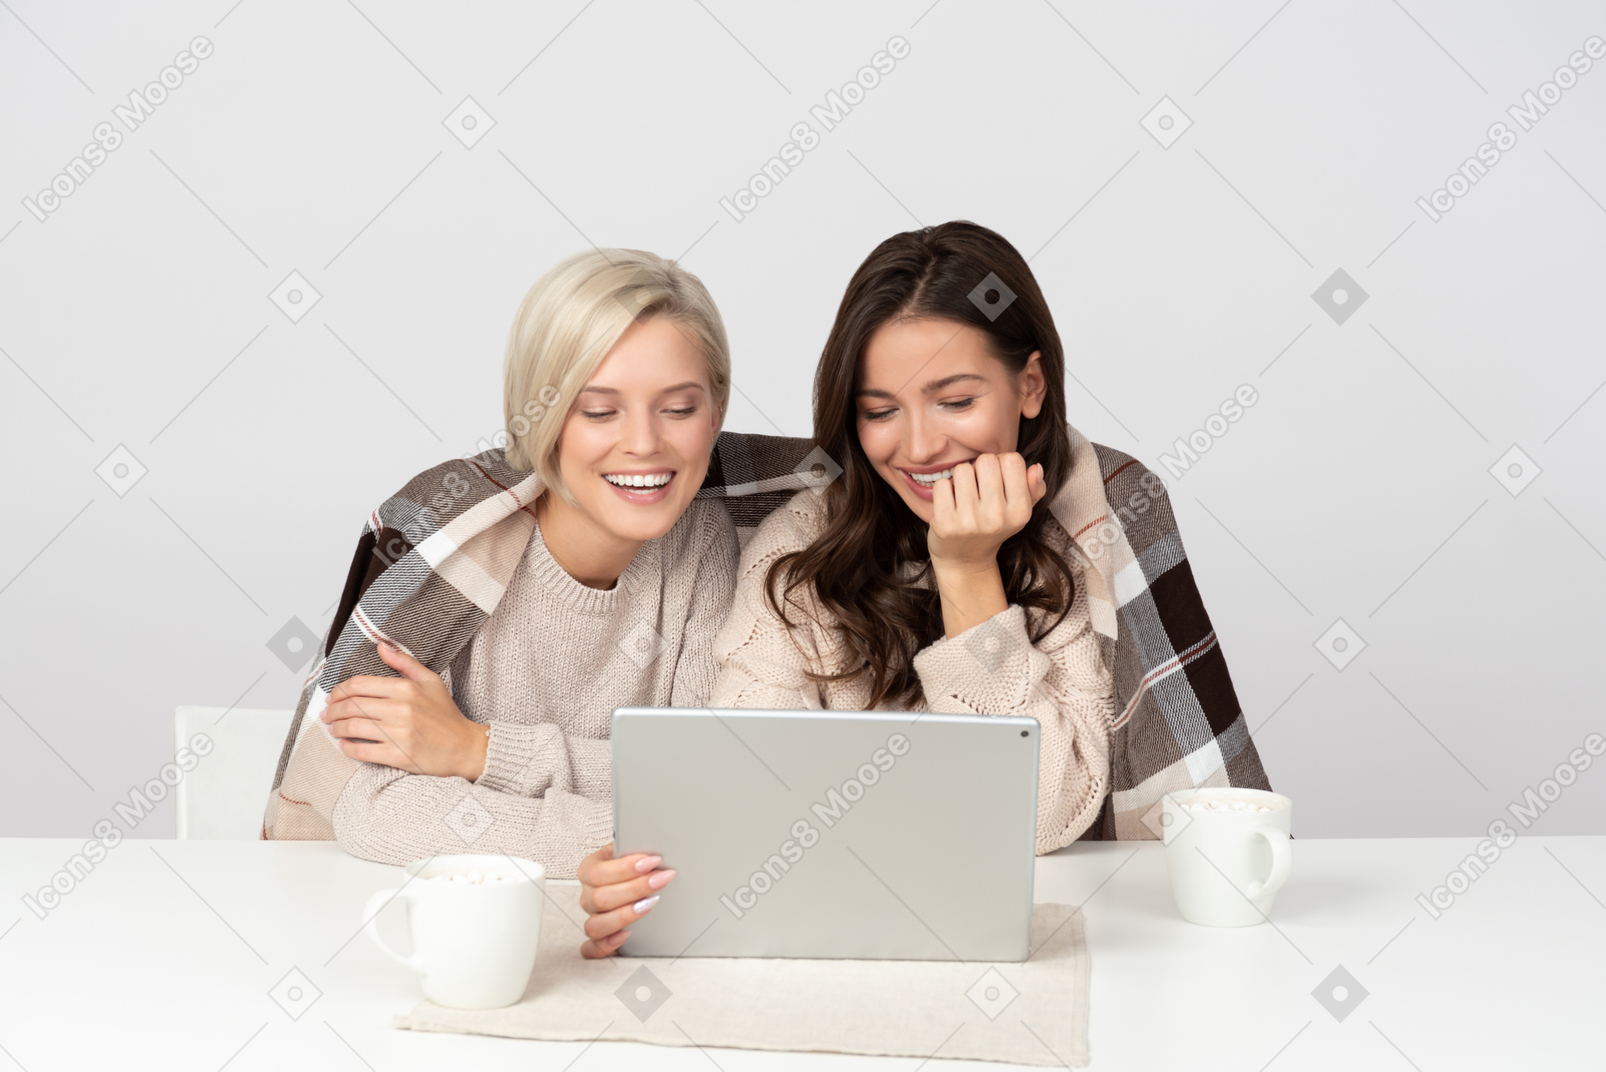 Young women watching movies and laughing